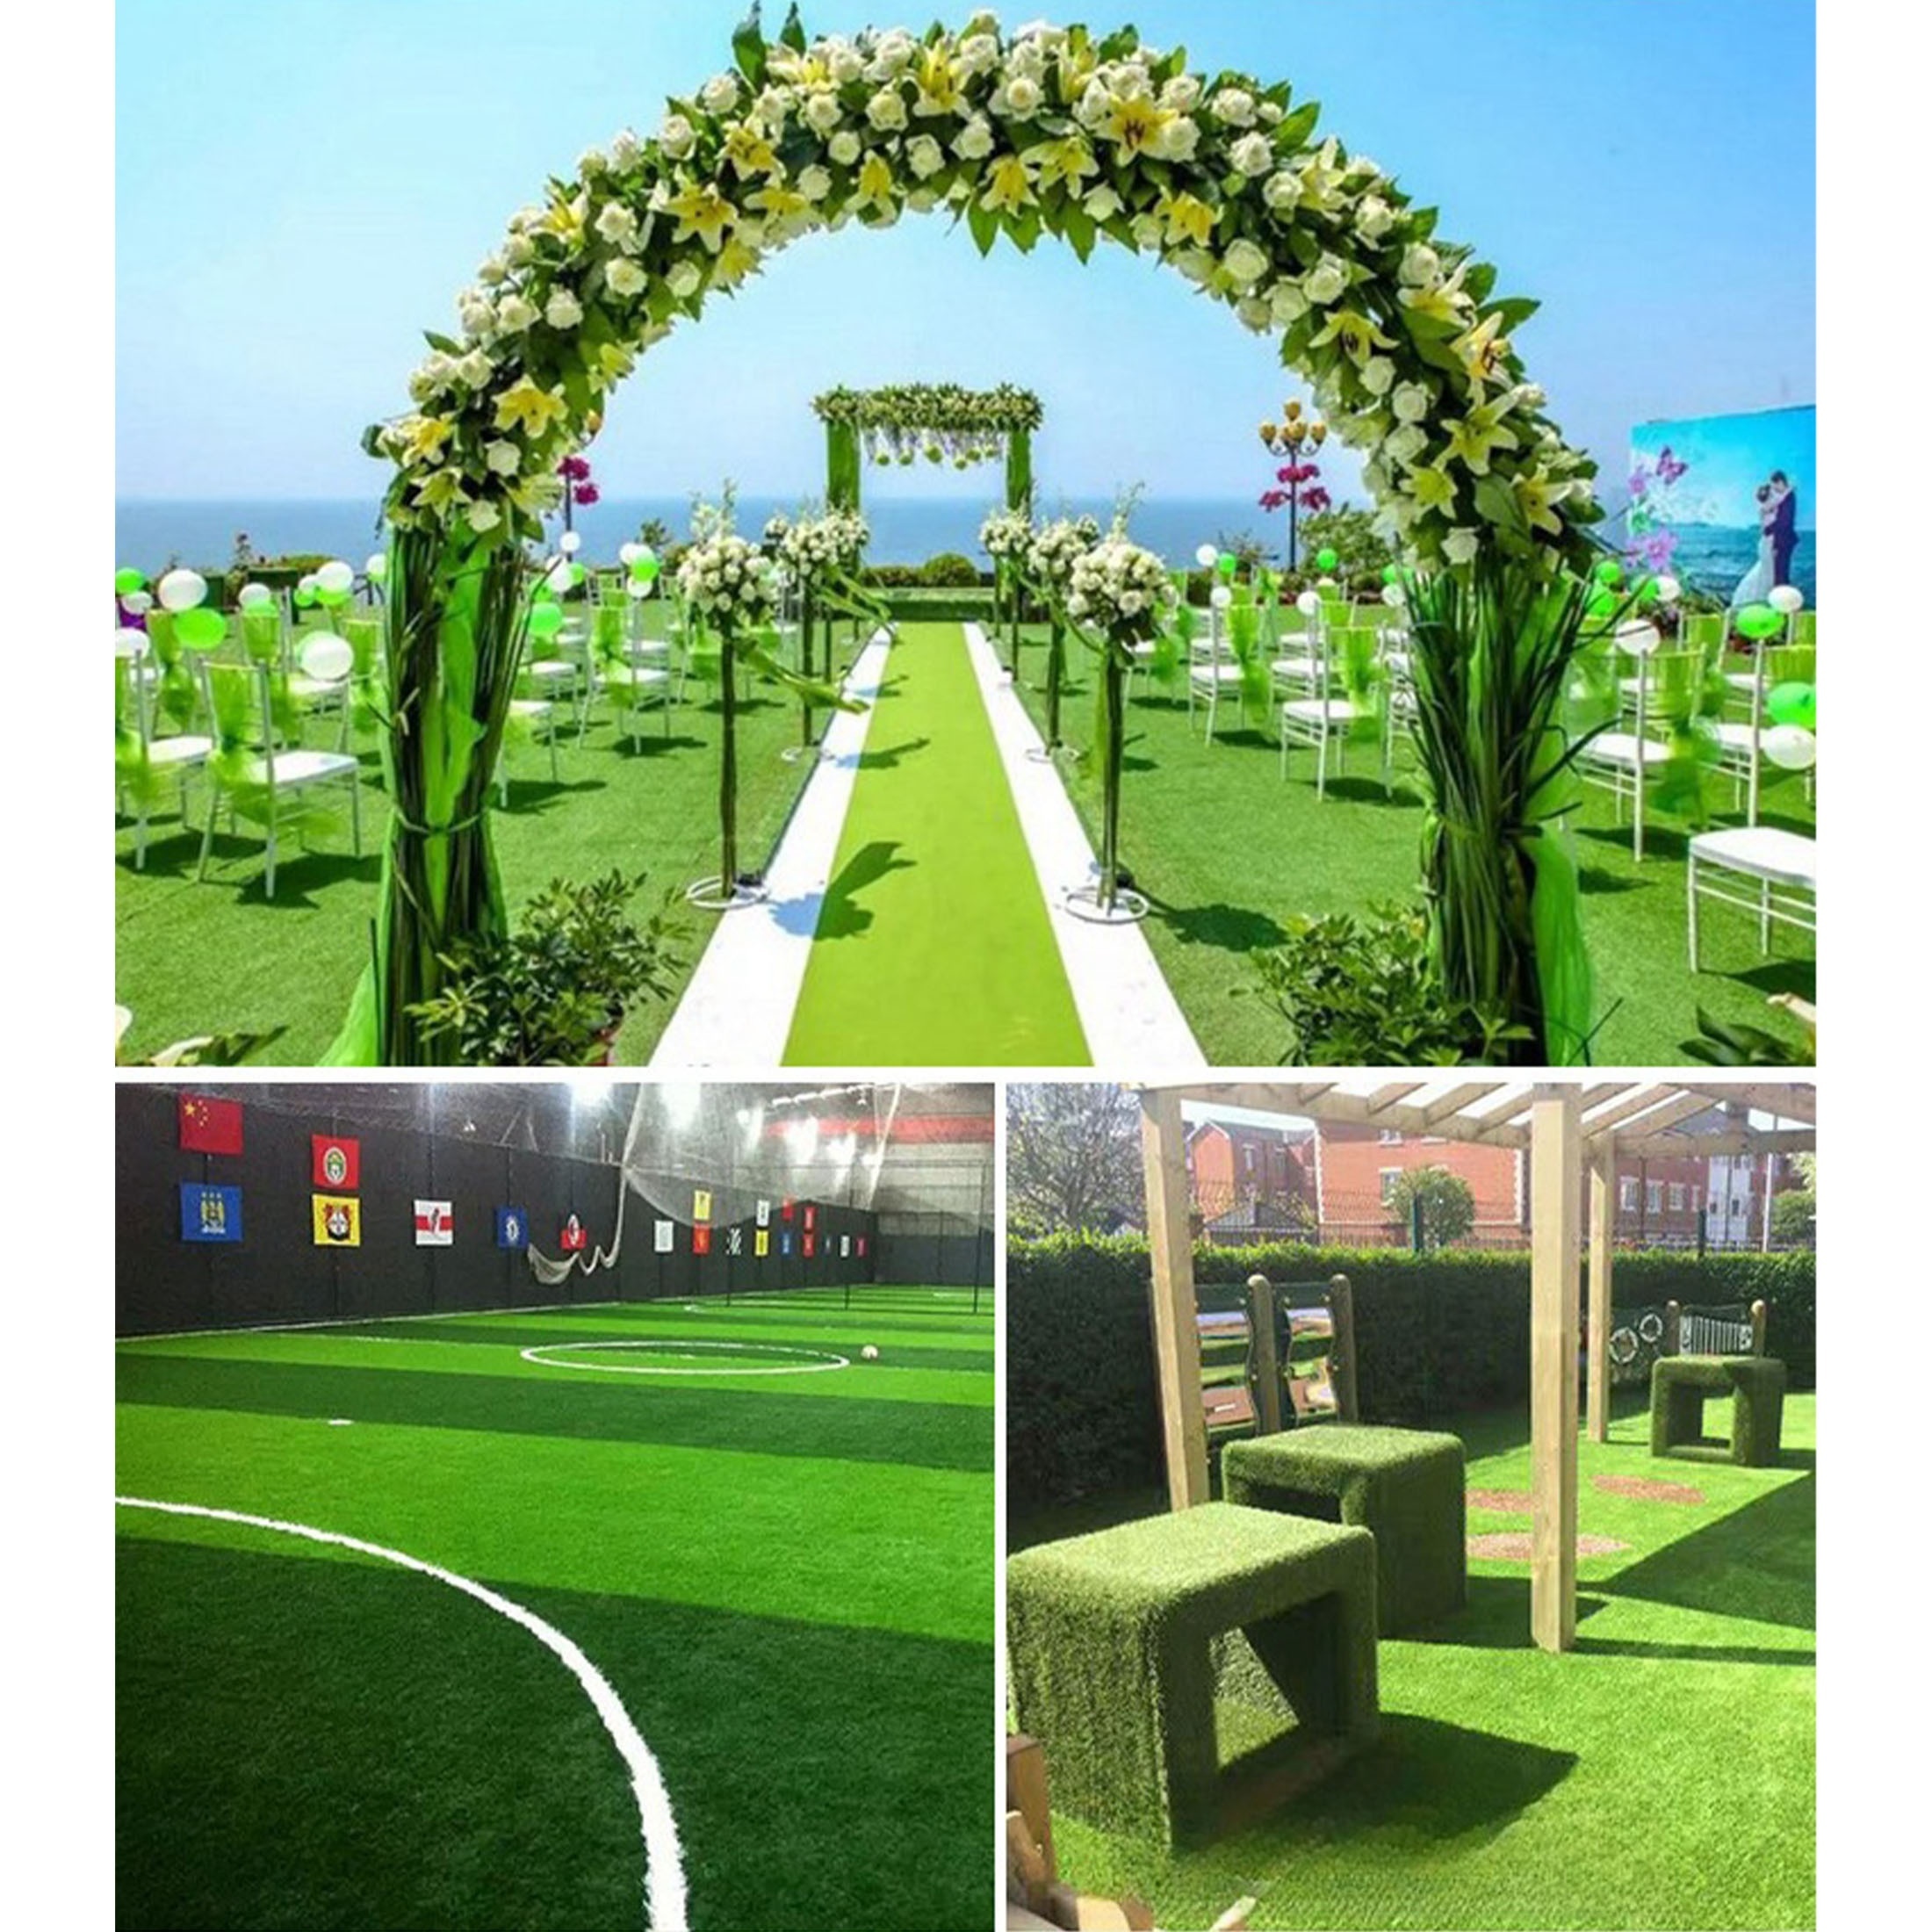 

Thick Encrypted Synthetic Lawn - Wedding Outdoor Football Field Artificial Grass Carpet - 50cm/19.7inch X 200cm/78.8inch - Plastic Material - 10mm Grass Fibers